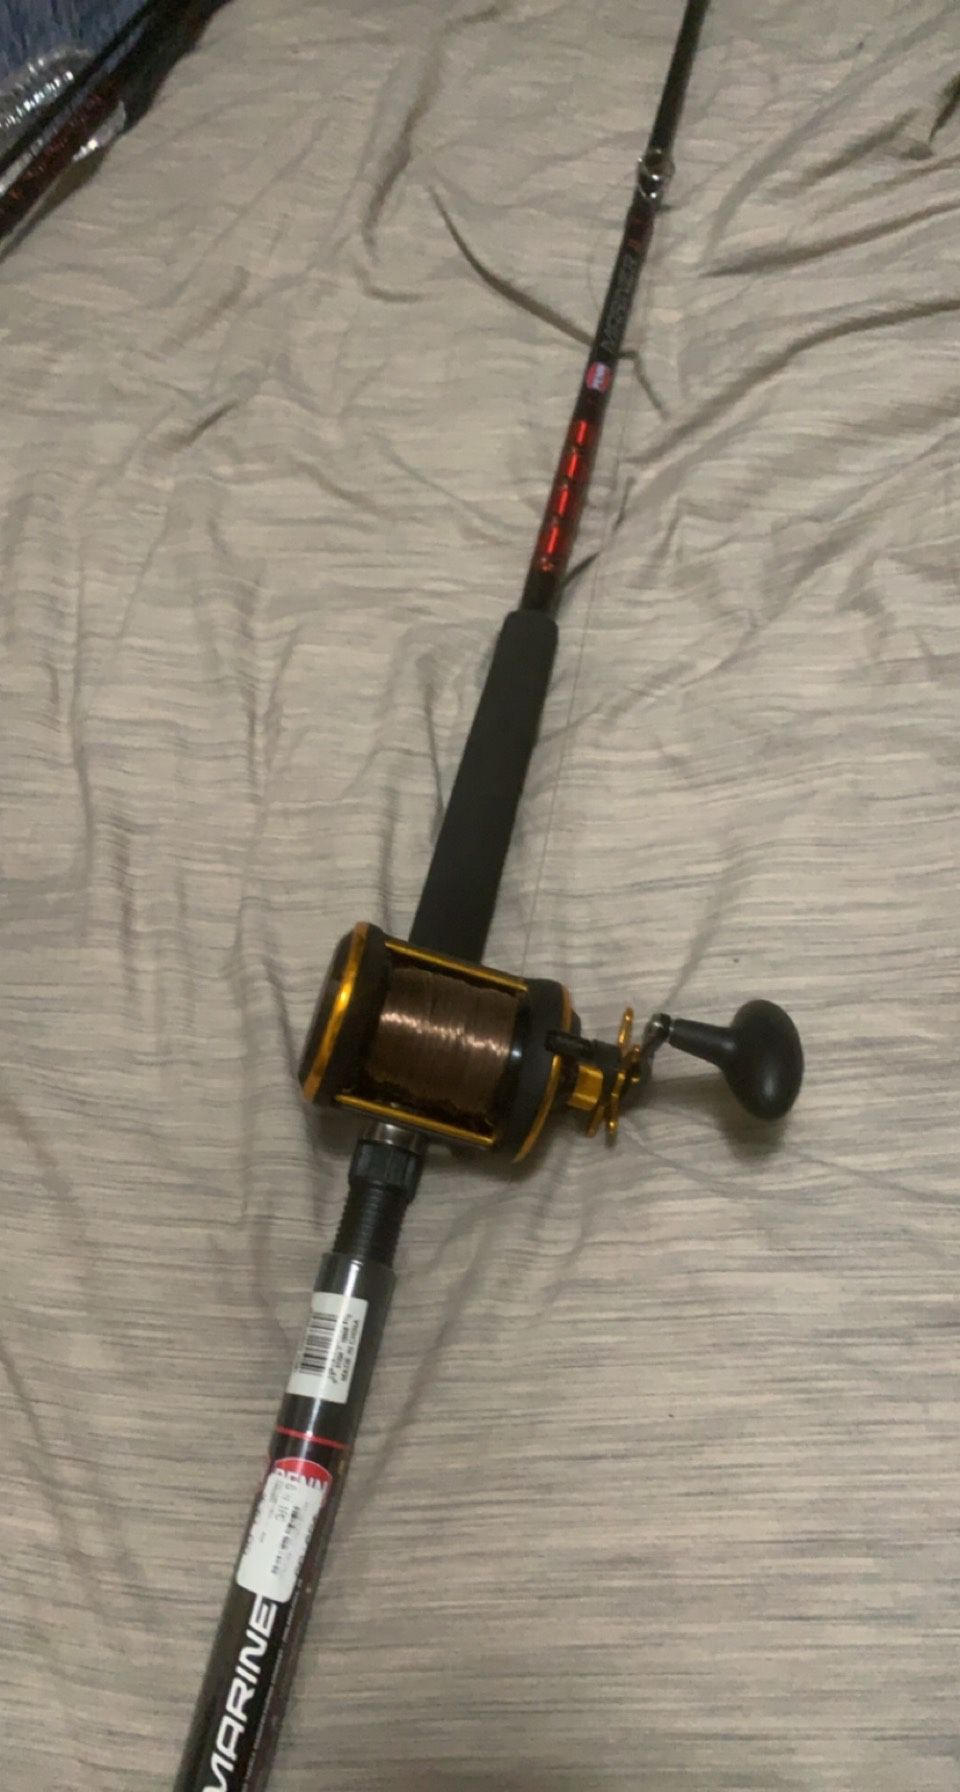 Penn mariner pole with squall 40 reel